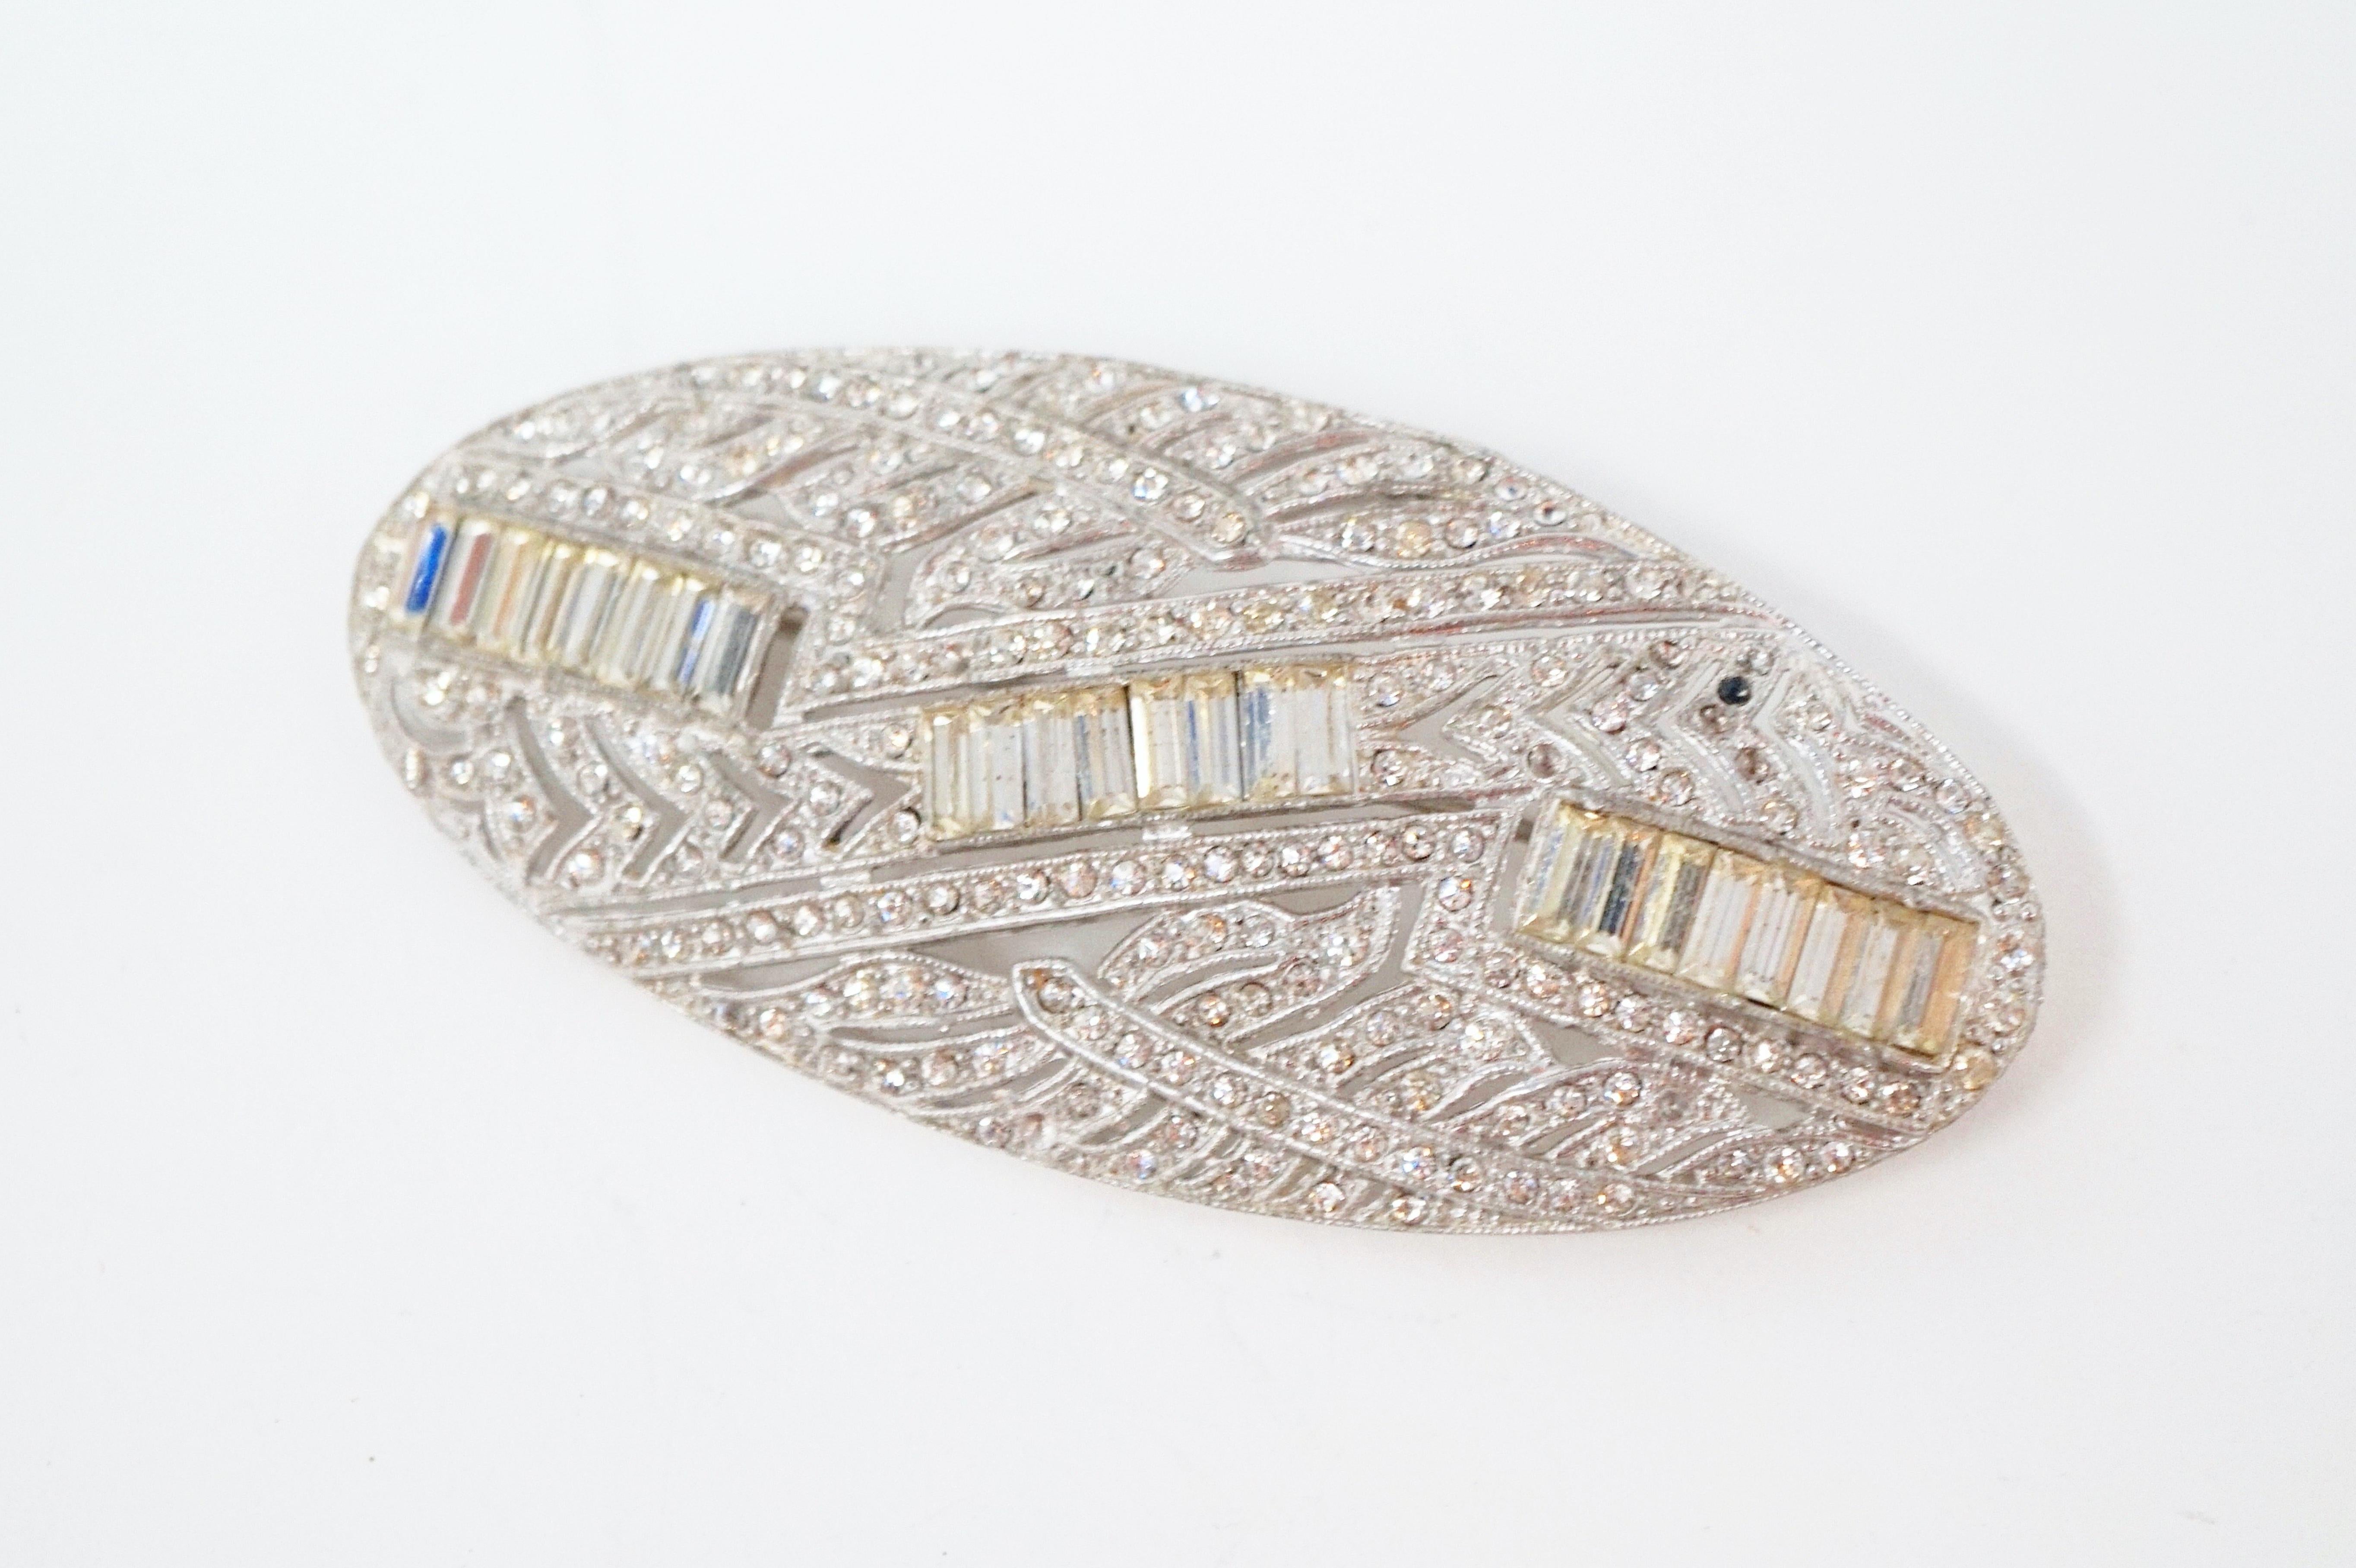 Beautiful vintage art deco style rhinestone brooch, circa mid-20th Century.  This ornate piece features pavé rhinestones and baguette crystal accents nestled in silver tone hardware.  A beautiful piece from a bygone era and a wonderful addition to